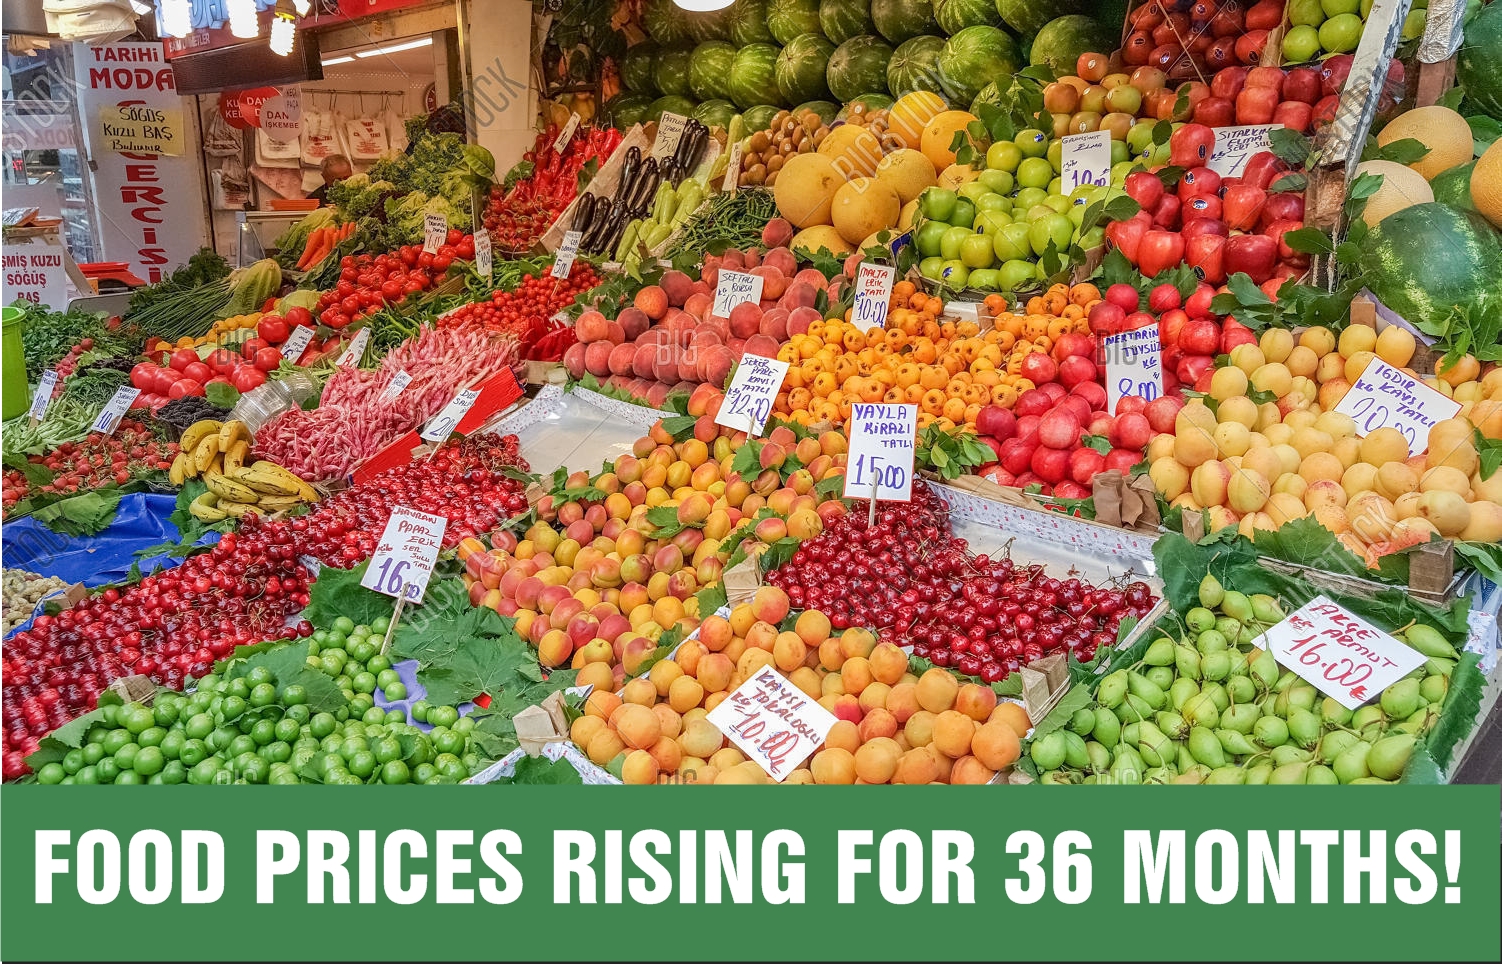 Food prices rising for 36 months!